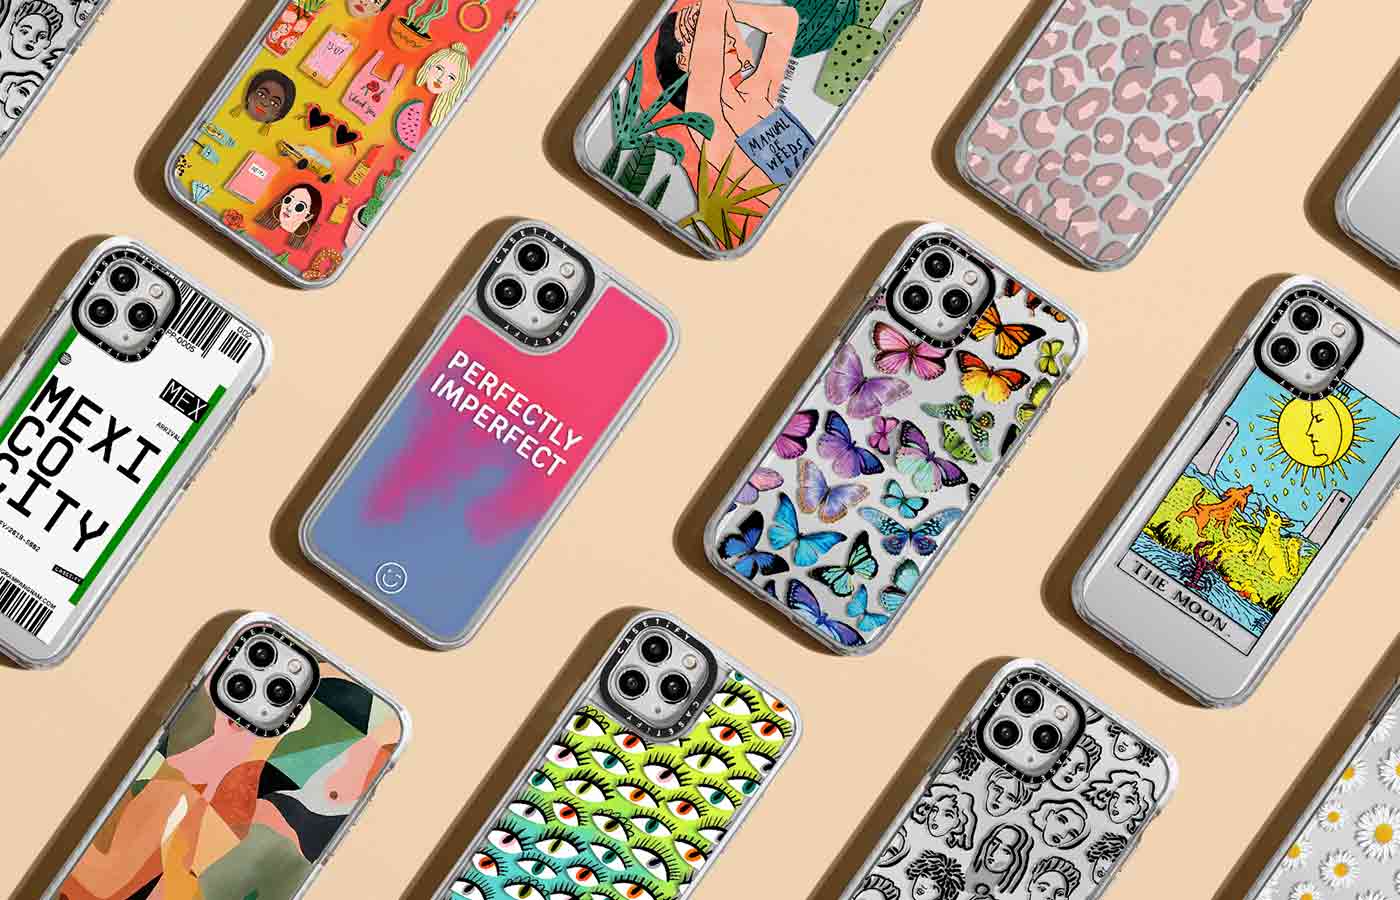 Casetify - Rakuten coupons and Cash Back